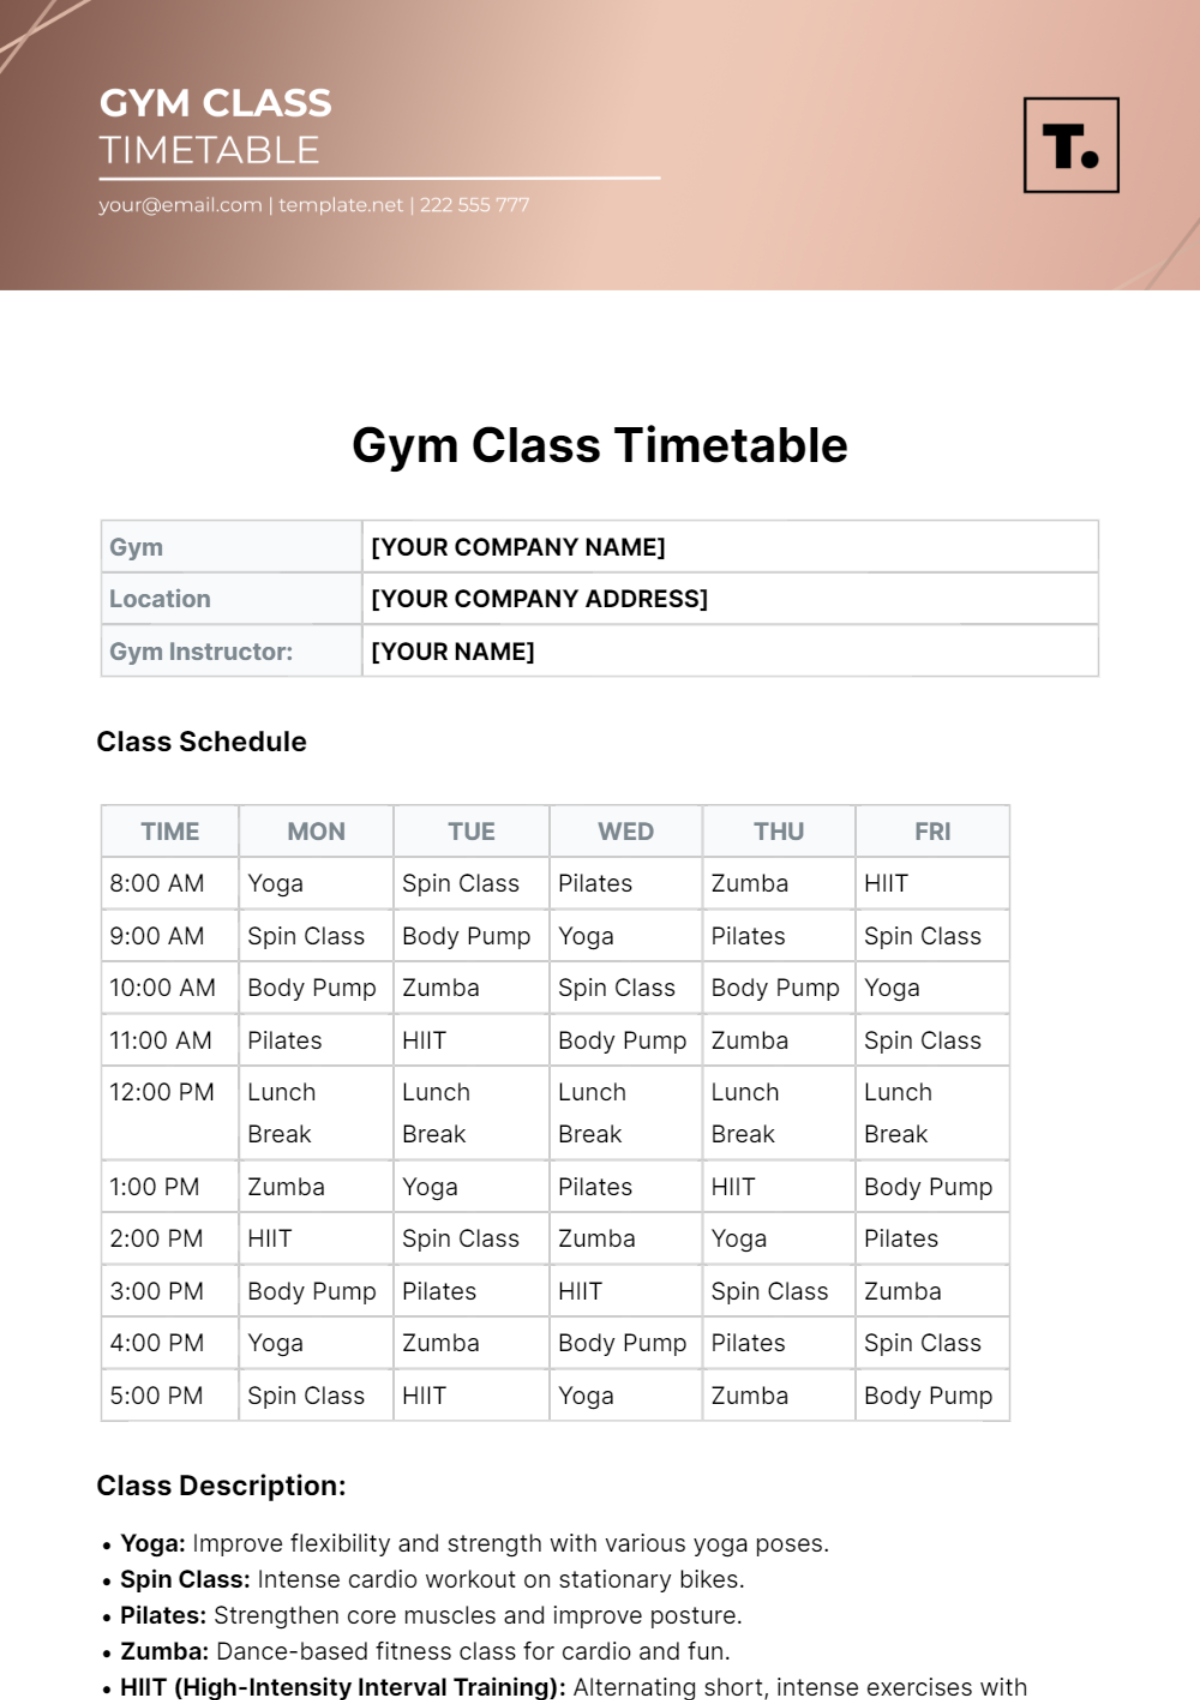 Gym Class Timetable Template